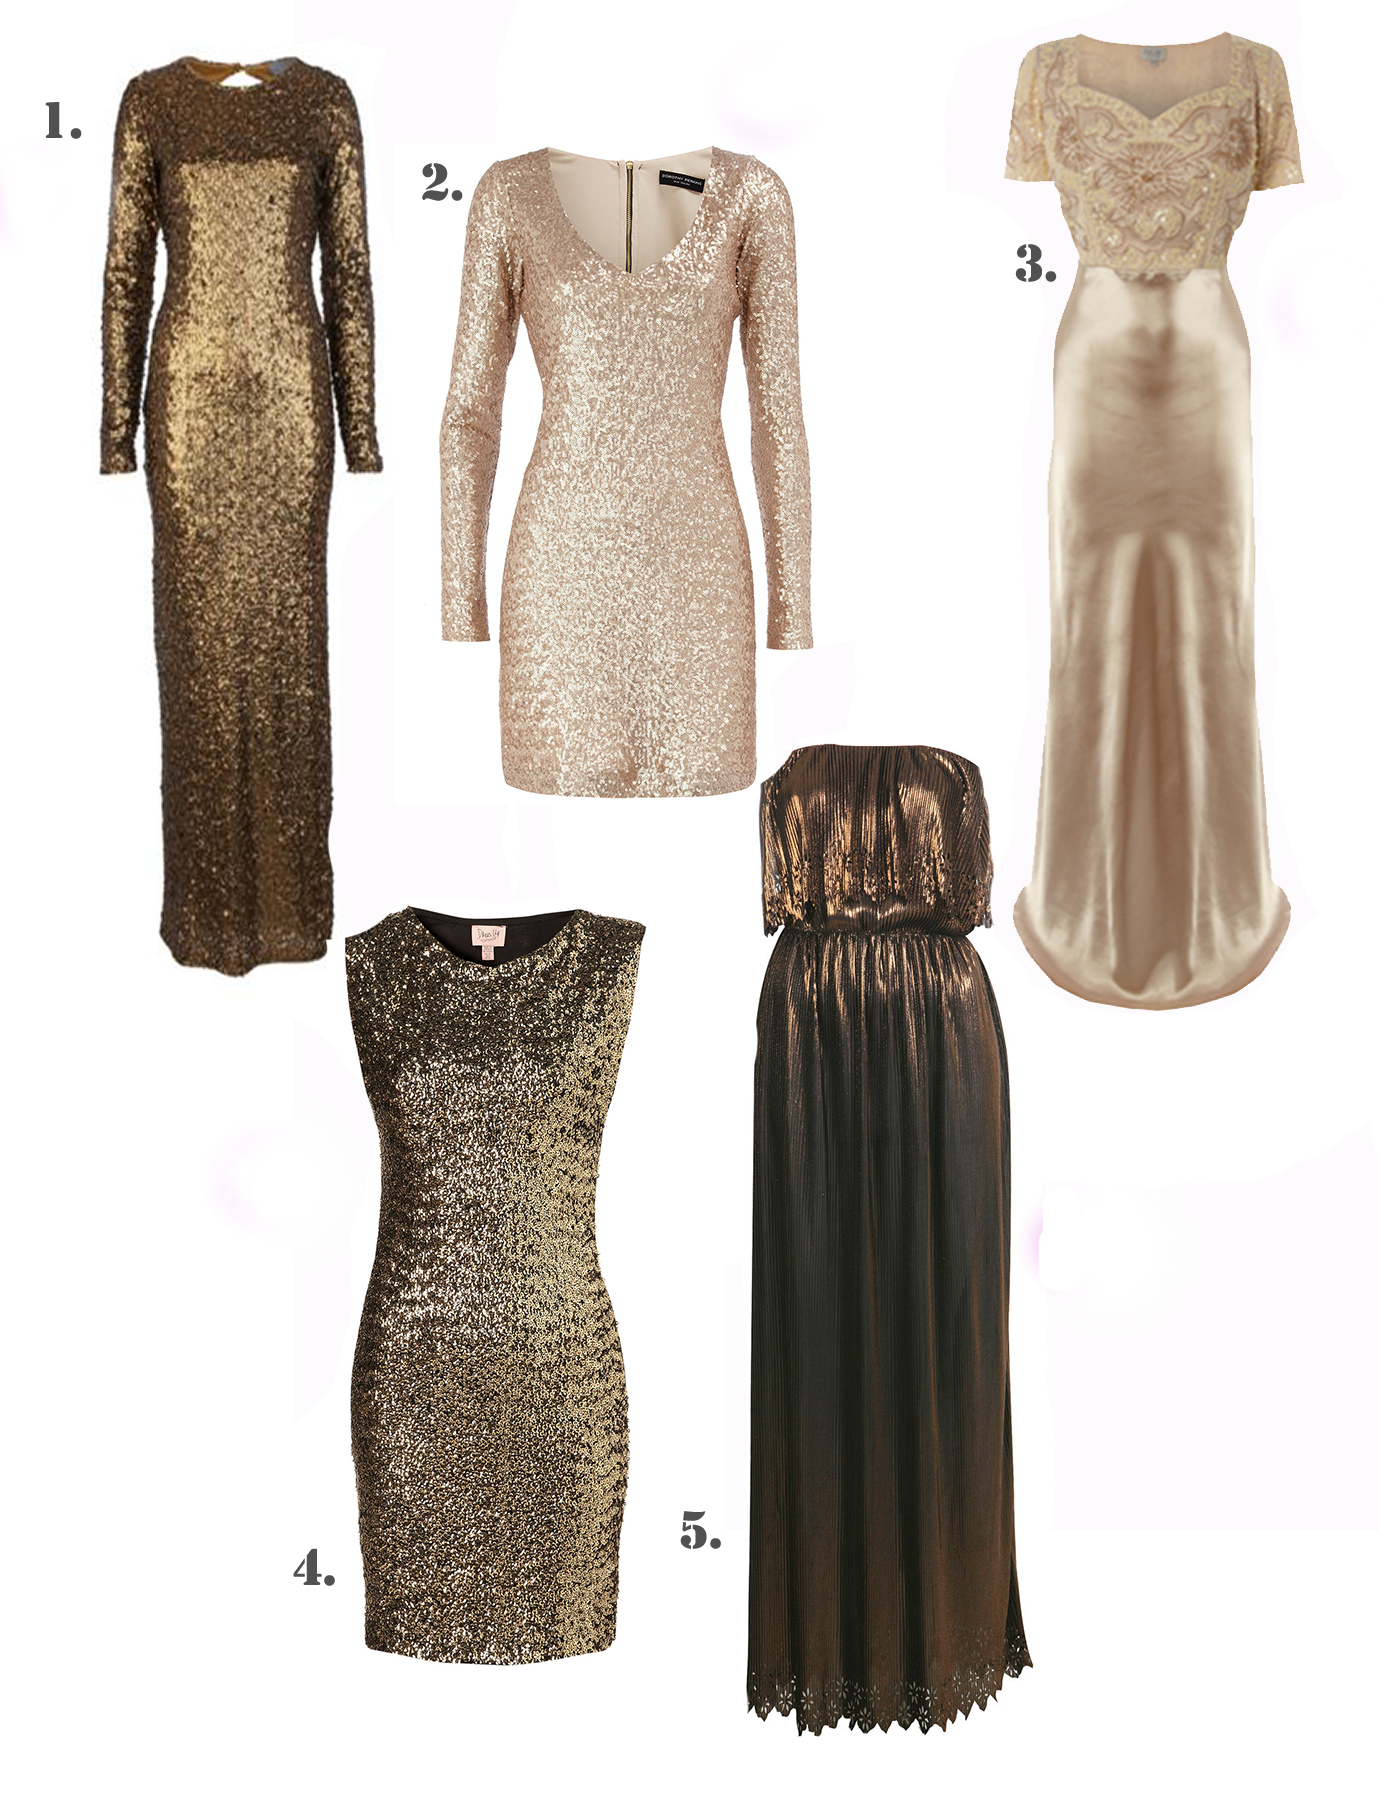 River Island Gold Sequin Dress - How To Pick